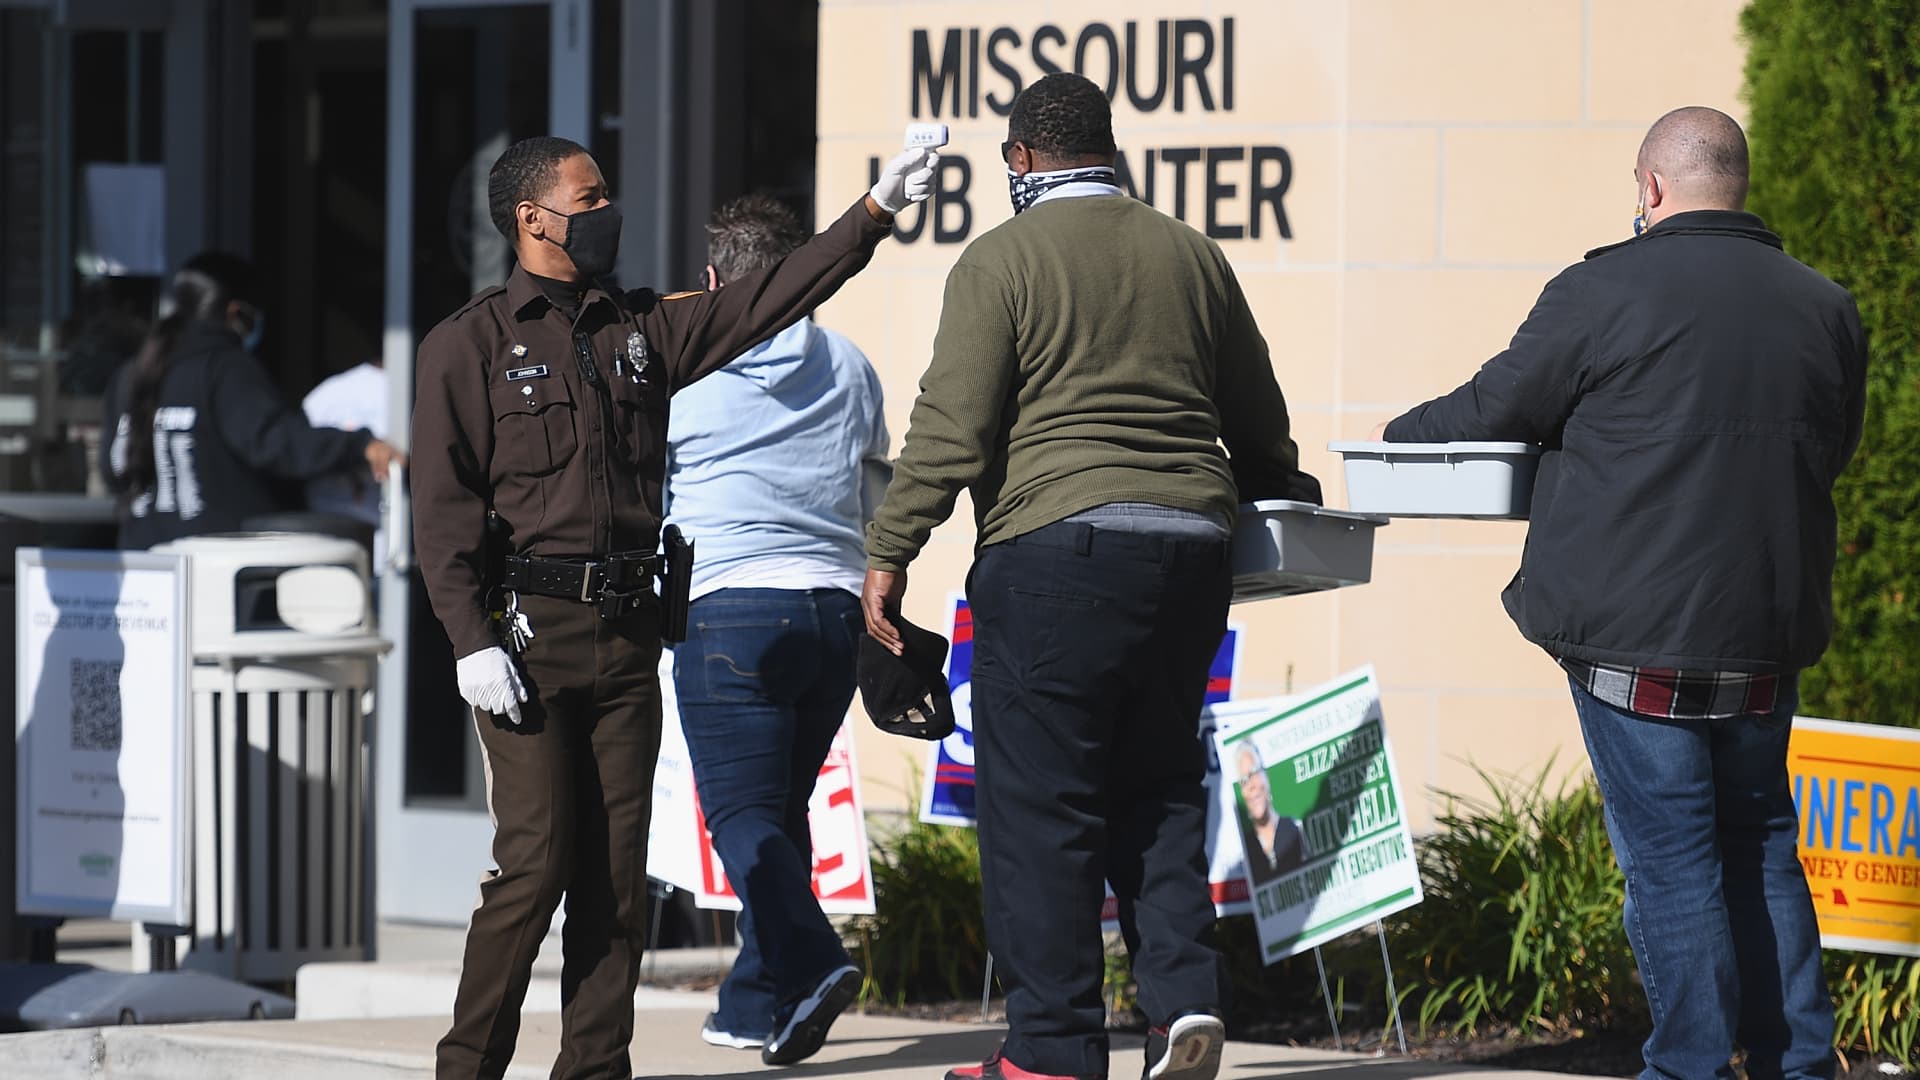 A Law Enforcement Officer temperature screens voters as they wait in line to cast their ballots on November 3, 2020 at the St. Louis County Board of Elections in St. Ann, Missouri.